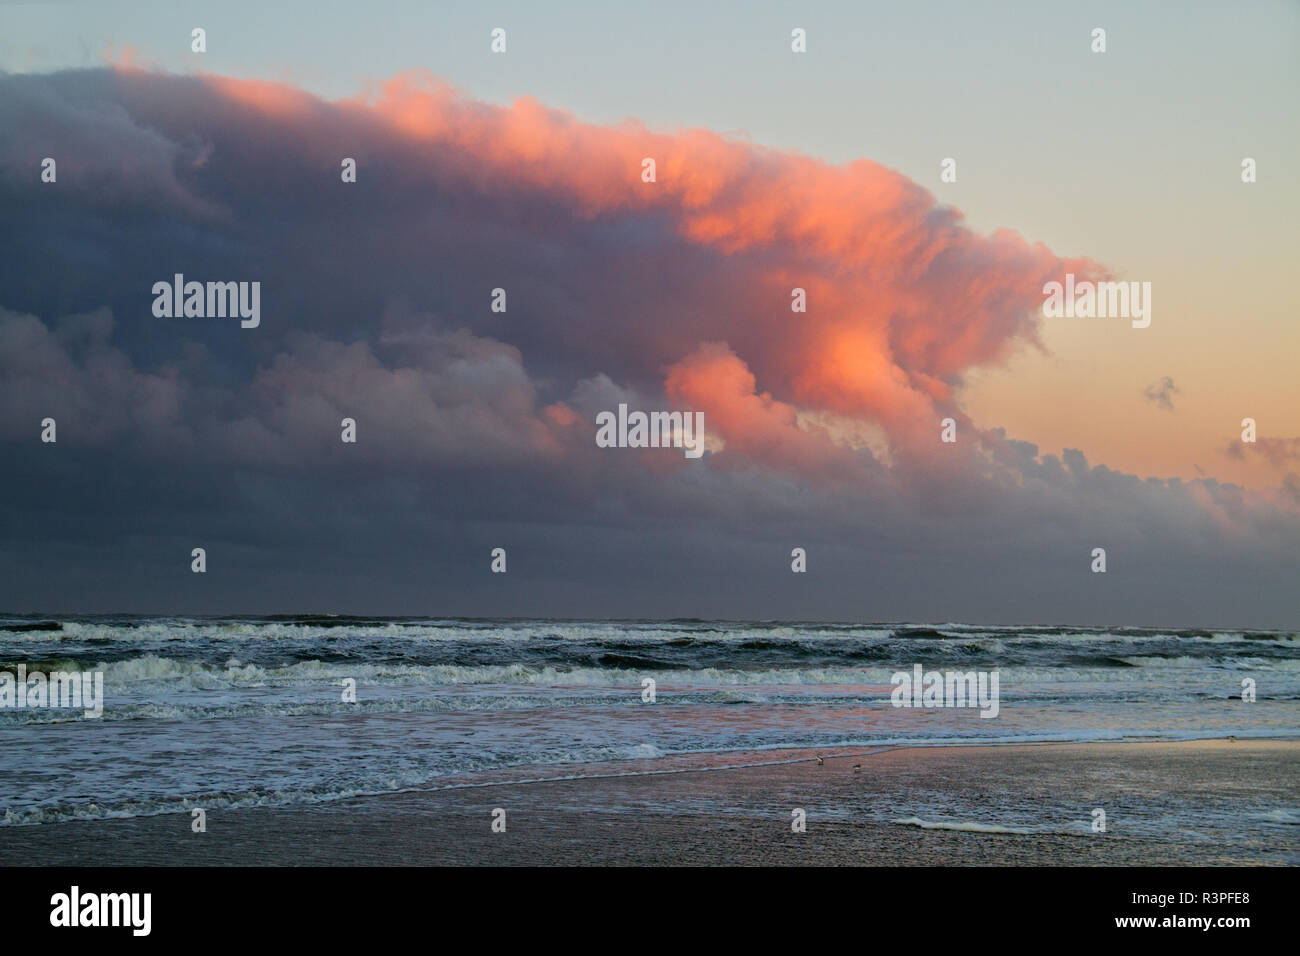 Storm front approaching over the sea after sunset: threatening red clouds above the dark water Stock Photo